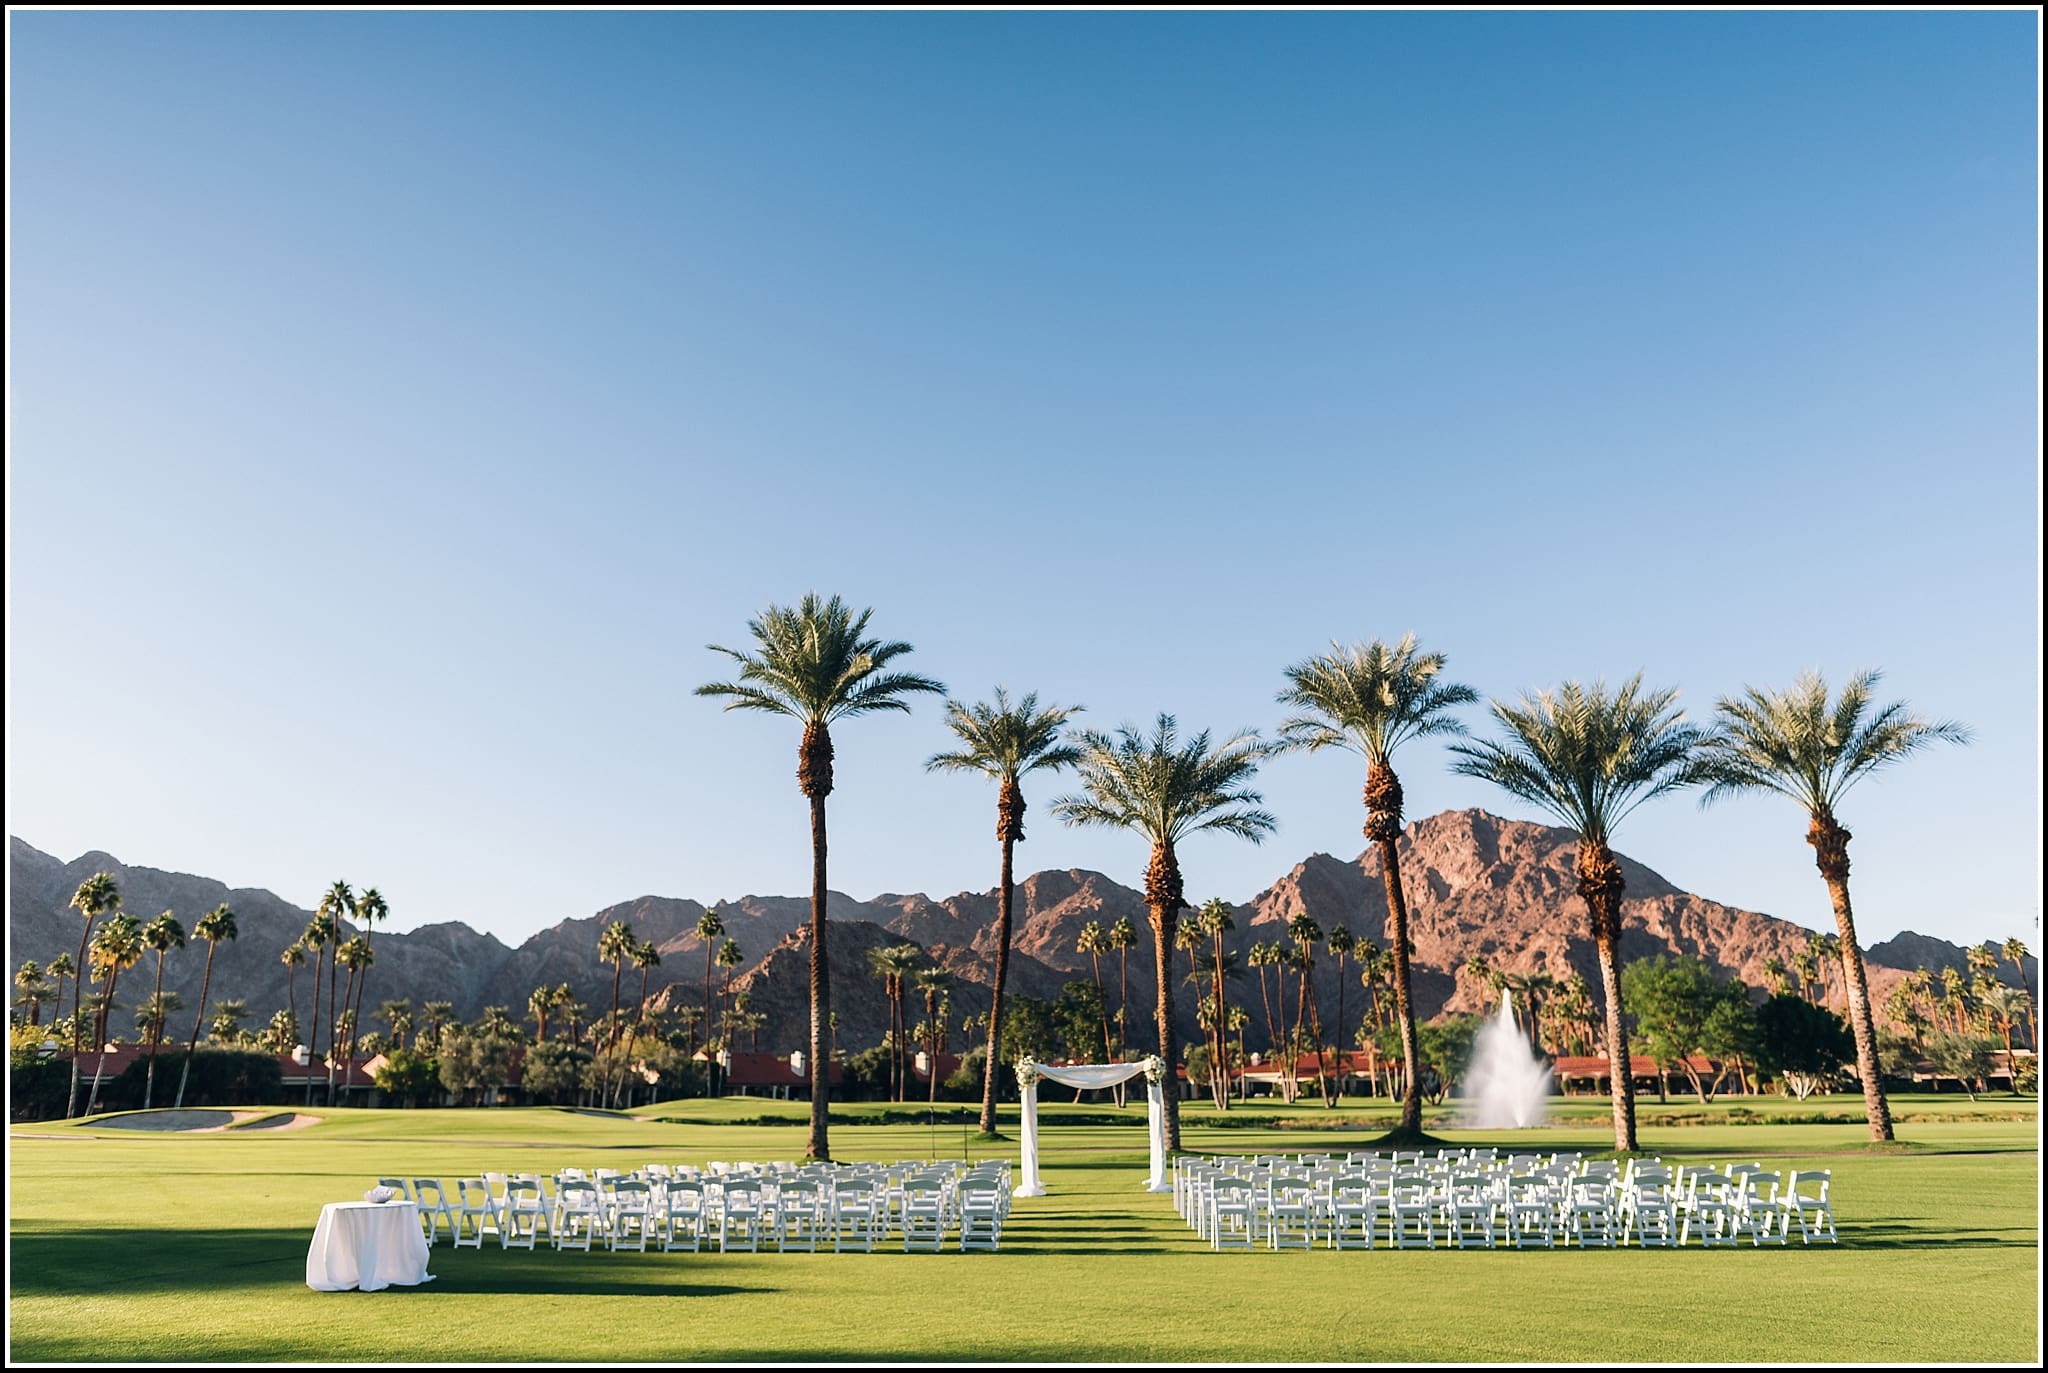  favorite wedding images 2016, wedding photos from 2016, our favorite wedding photos, la quinta wedding, la quinta country club wedding, la quinta golf course wedding